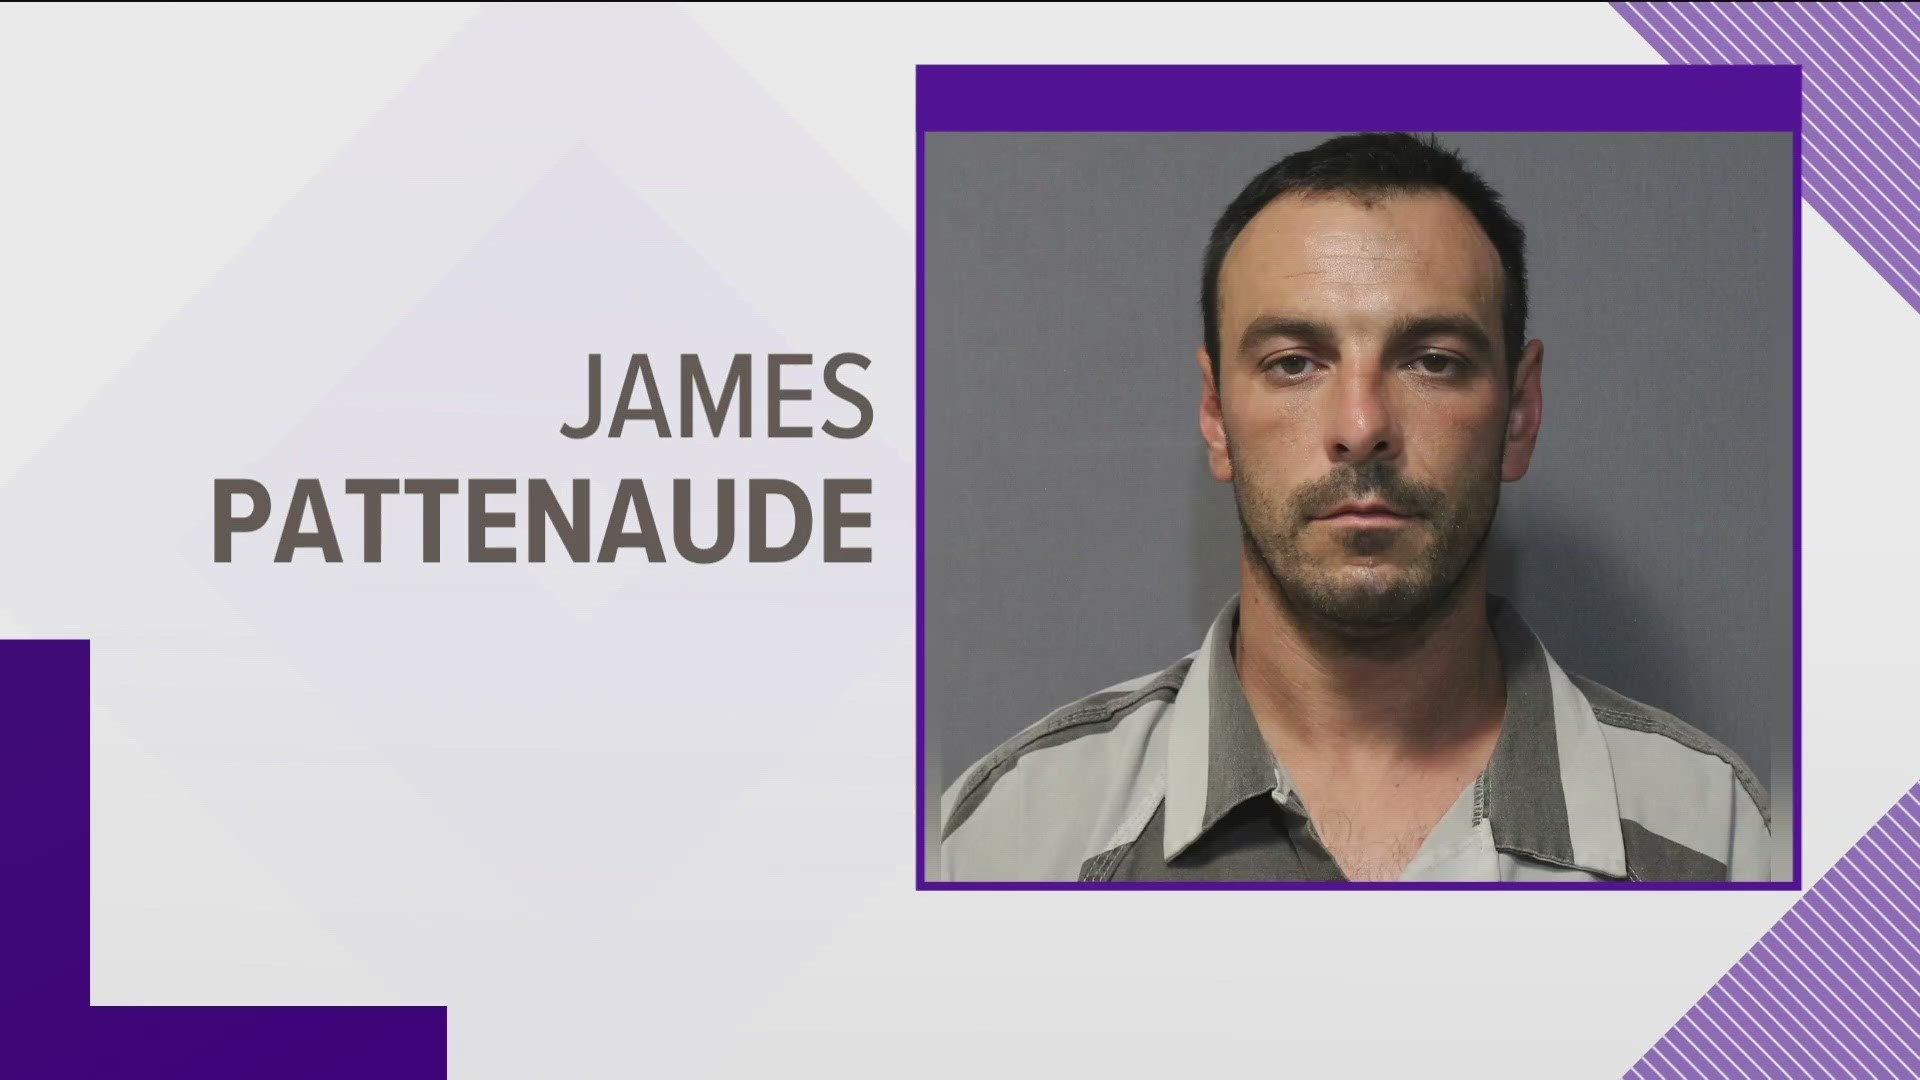 James Pattenaude, 38, of Monroe County, is a person of interest in a shooting investigation Monday in Exeter Township. He is considered armed and dangerous.